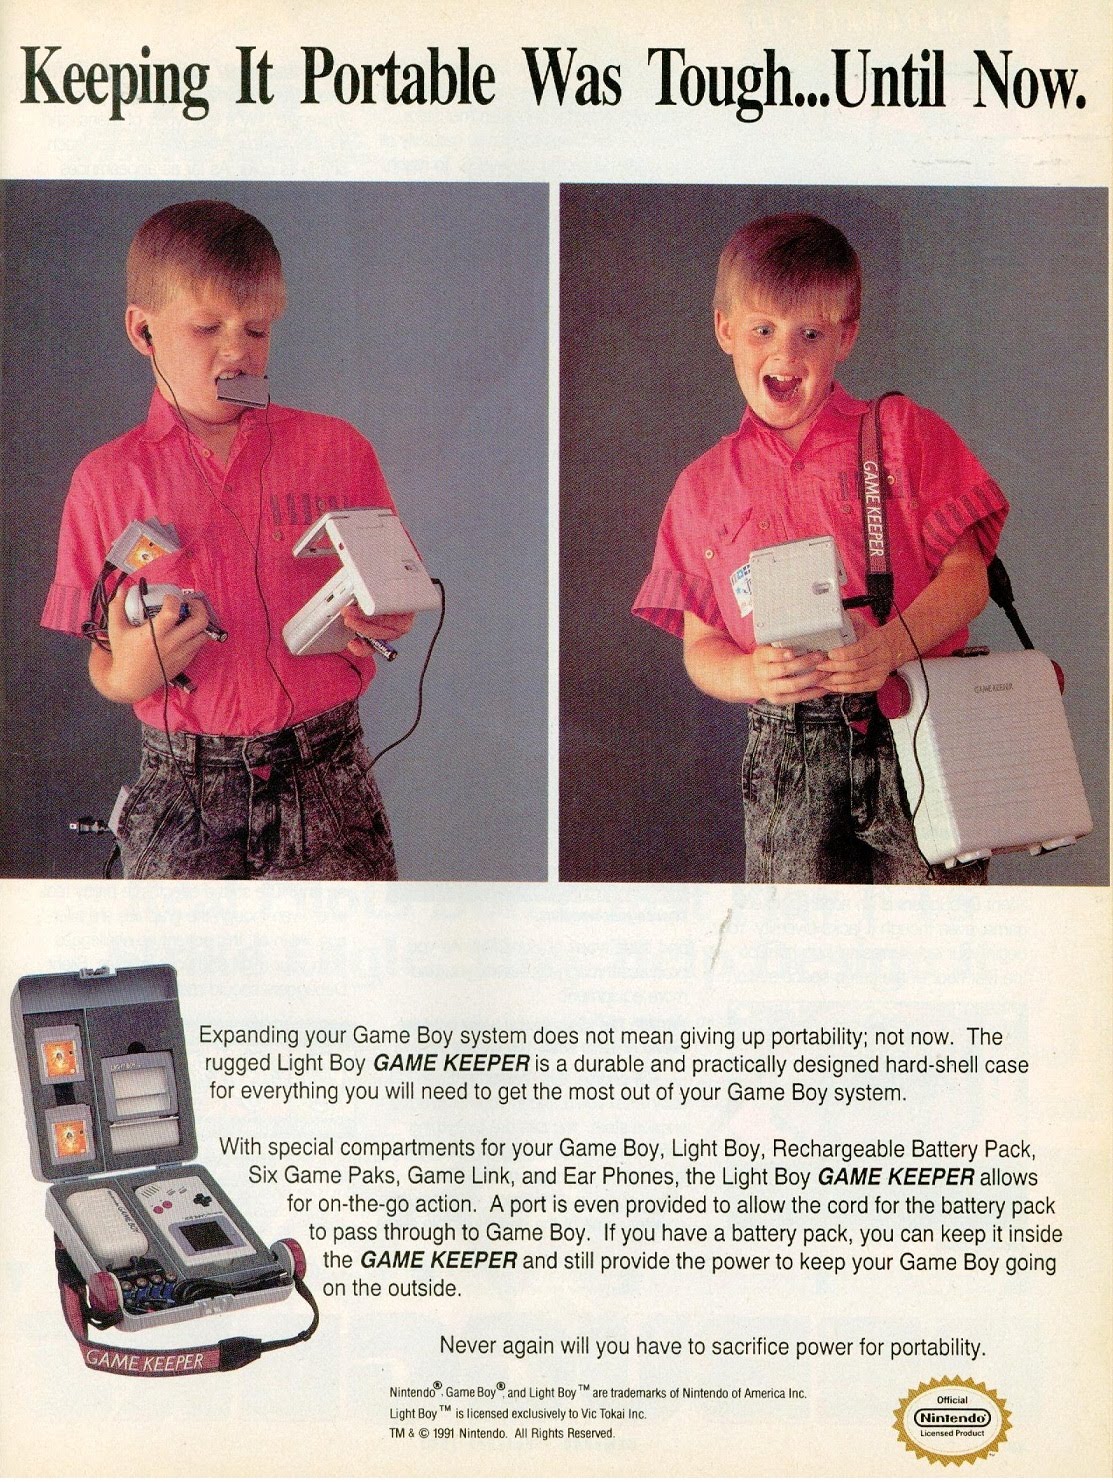 vintage gaming ads - gameboy game keeper - Keeping It Portable Was Tough...Until Now. Expanding your Game Boy system does not mean giving up portability not now. The foged Light Boy Game KEEPERs a durable and practically designed hardshel case for everyth